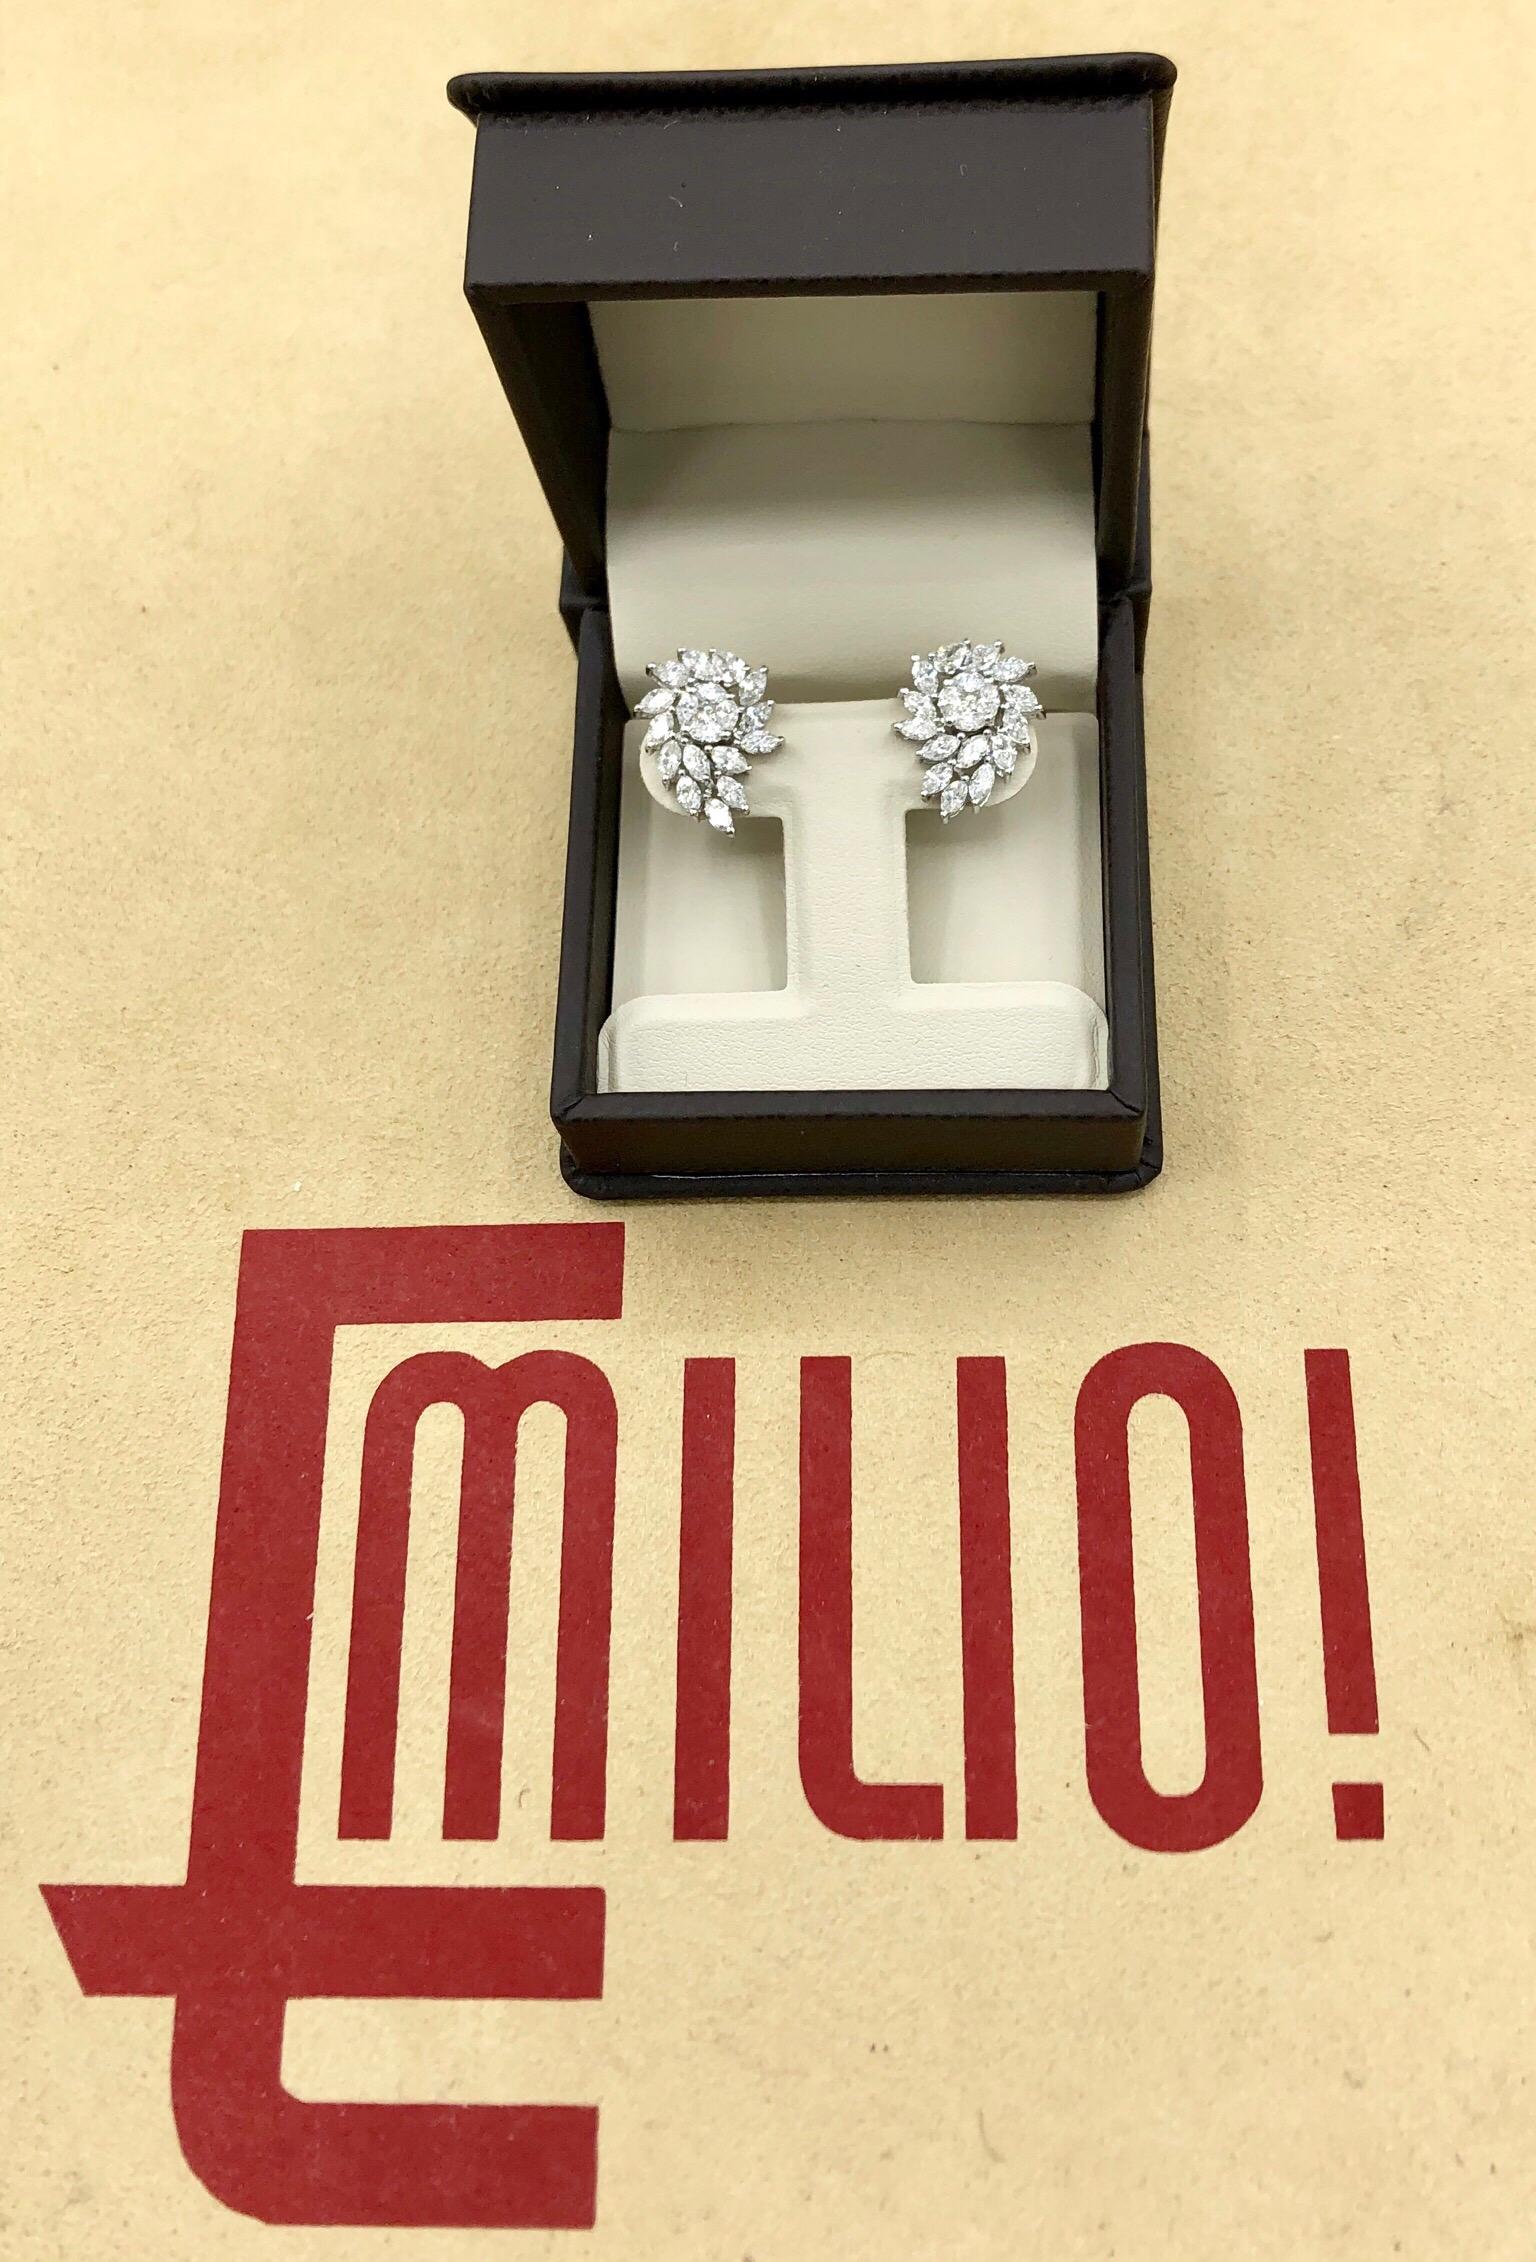 This lovely piece has been designed and manufactured in the Emilio Jewelry Atelier. Our brand is known for our perfection in jewelry making, and cherry picking the very best diamonds for our jewels. 
Approx total weight: 2.32 Carats
Metal: